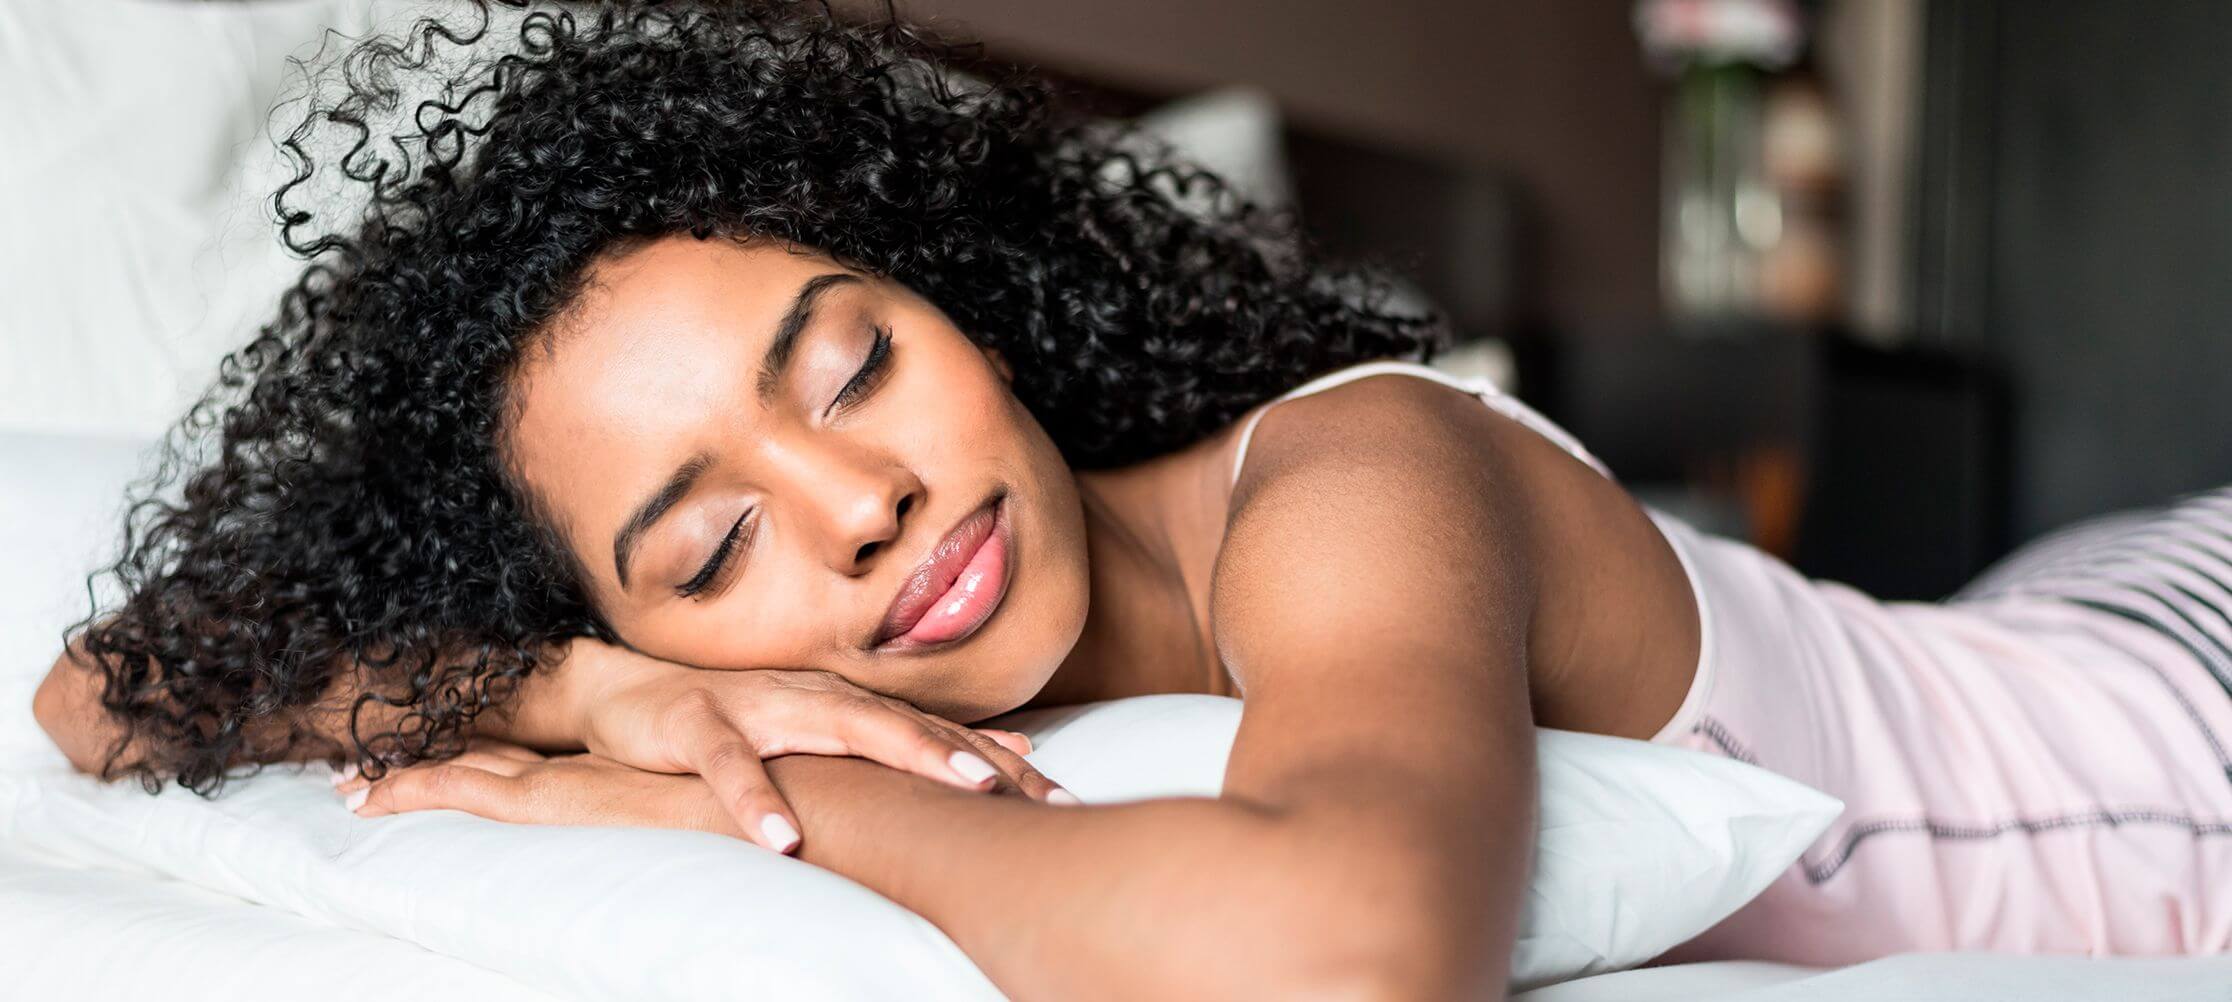 The Best Pillows For Stomach Sleepers To Help You Rest Easy At Night